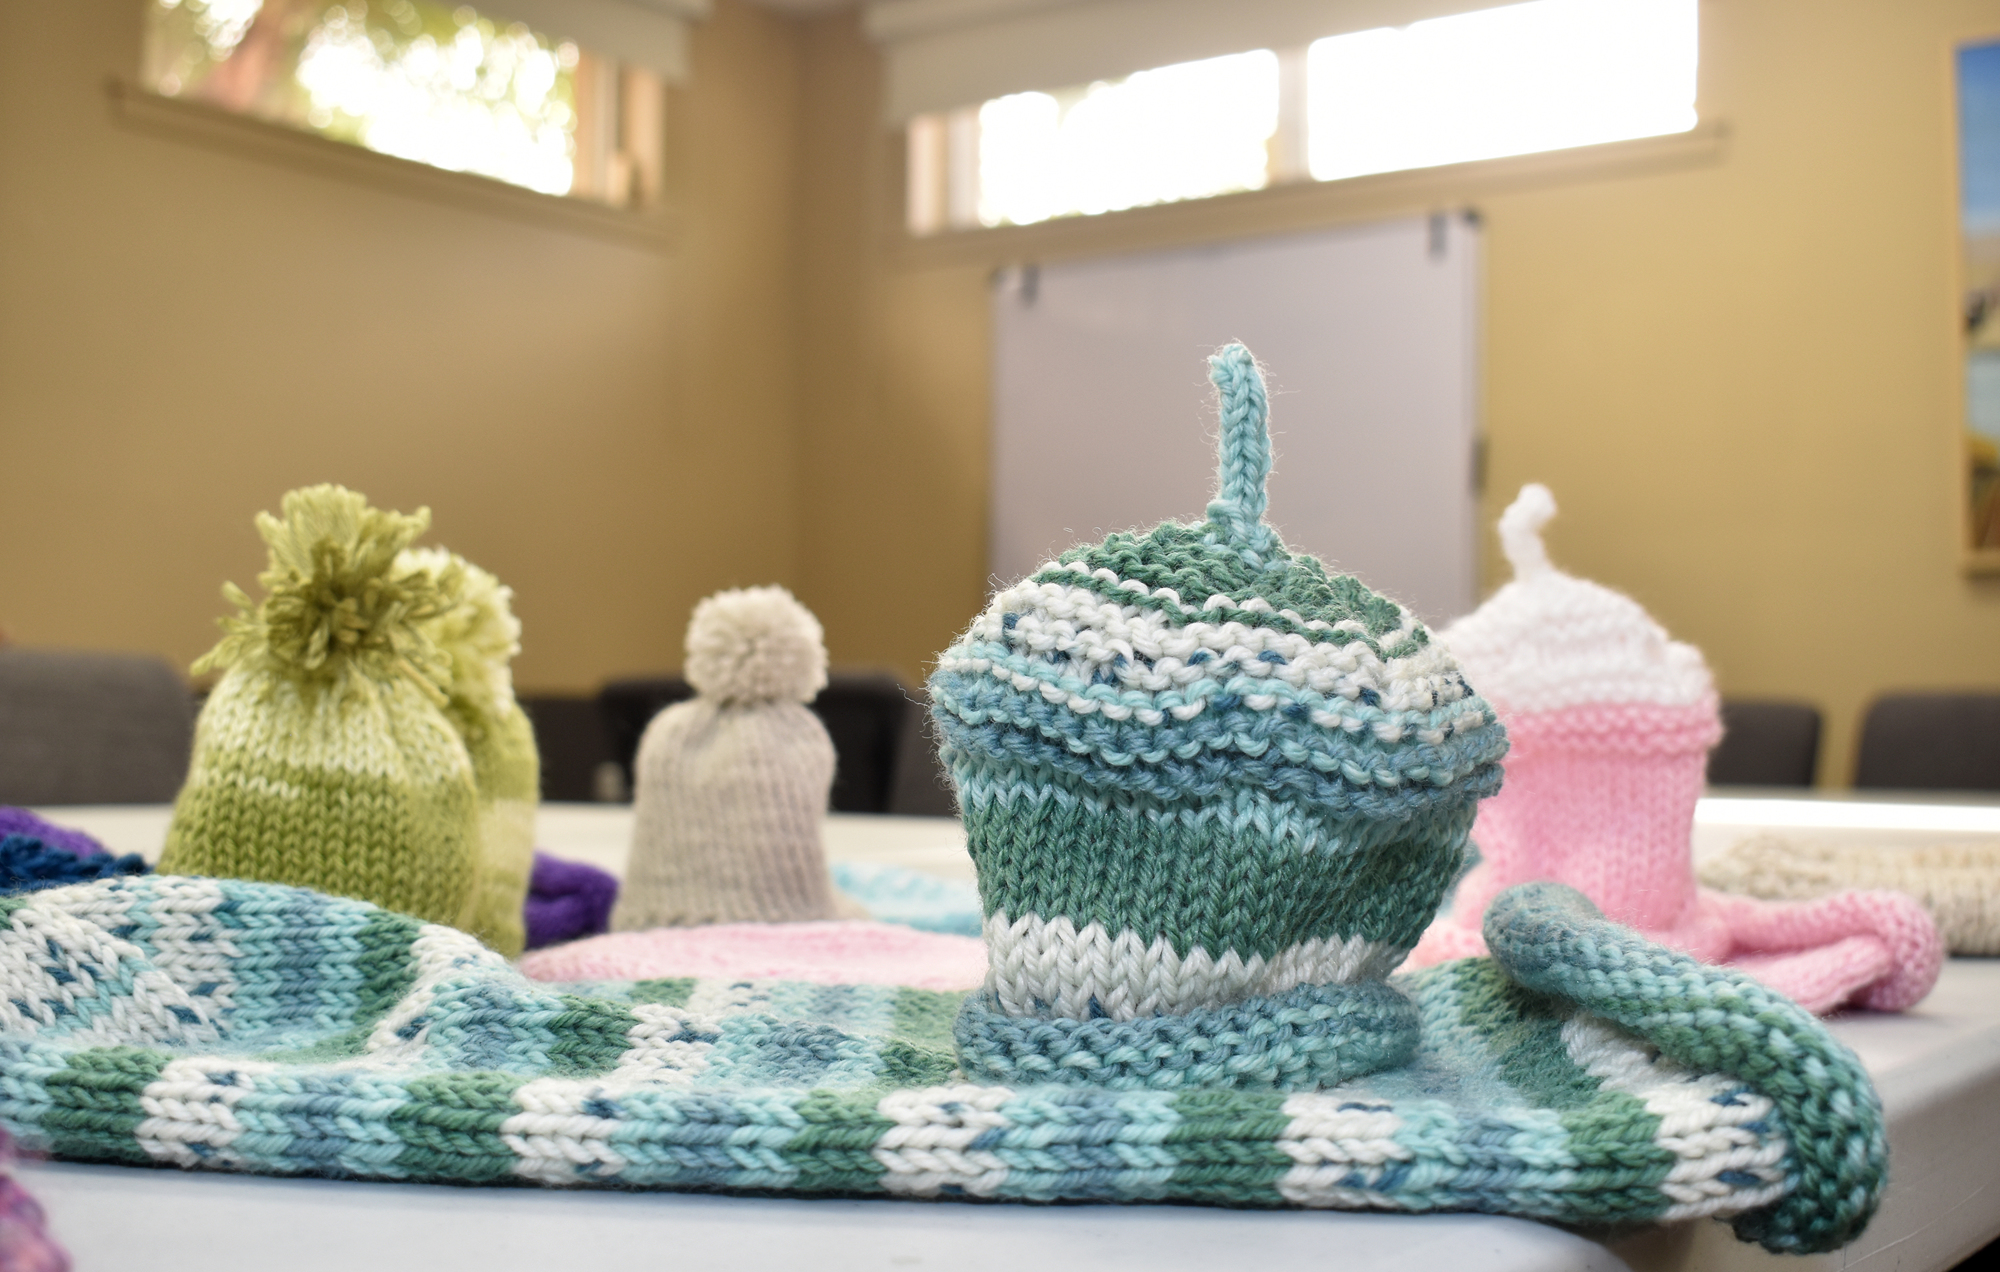 This year, the group is making something new in addition to the shawls and scarves. Swaddle Sacks are being knitted with leftover yarn to create comfort for newborns.